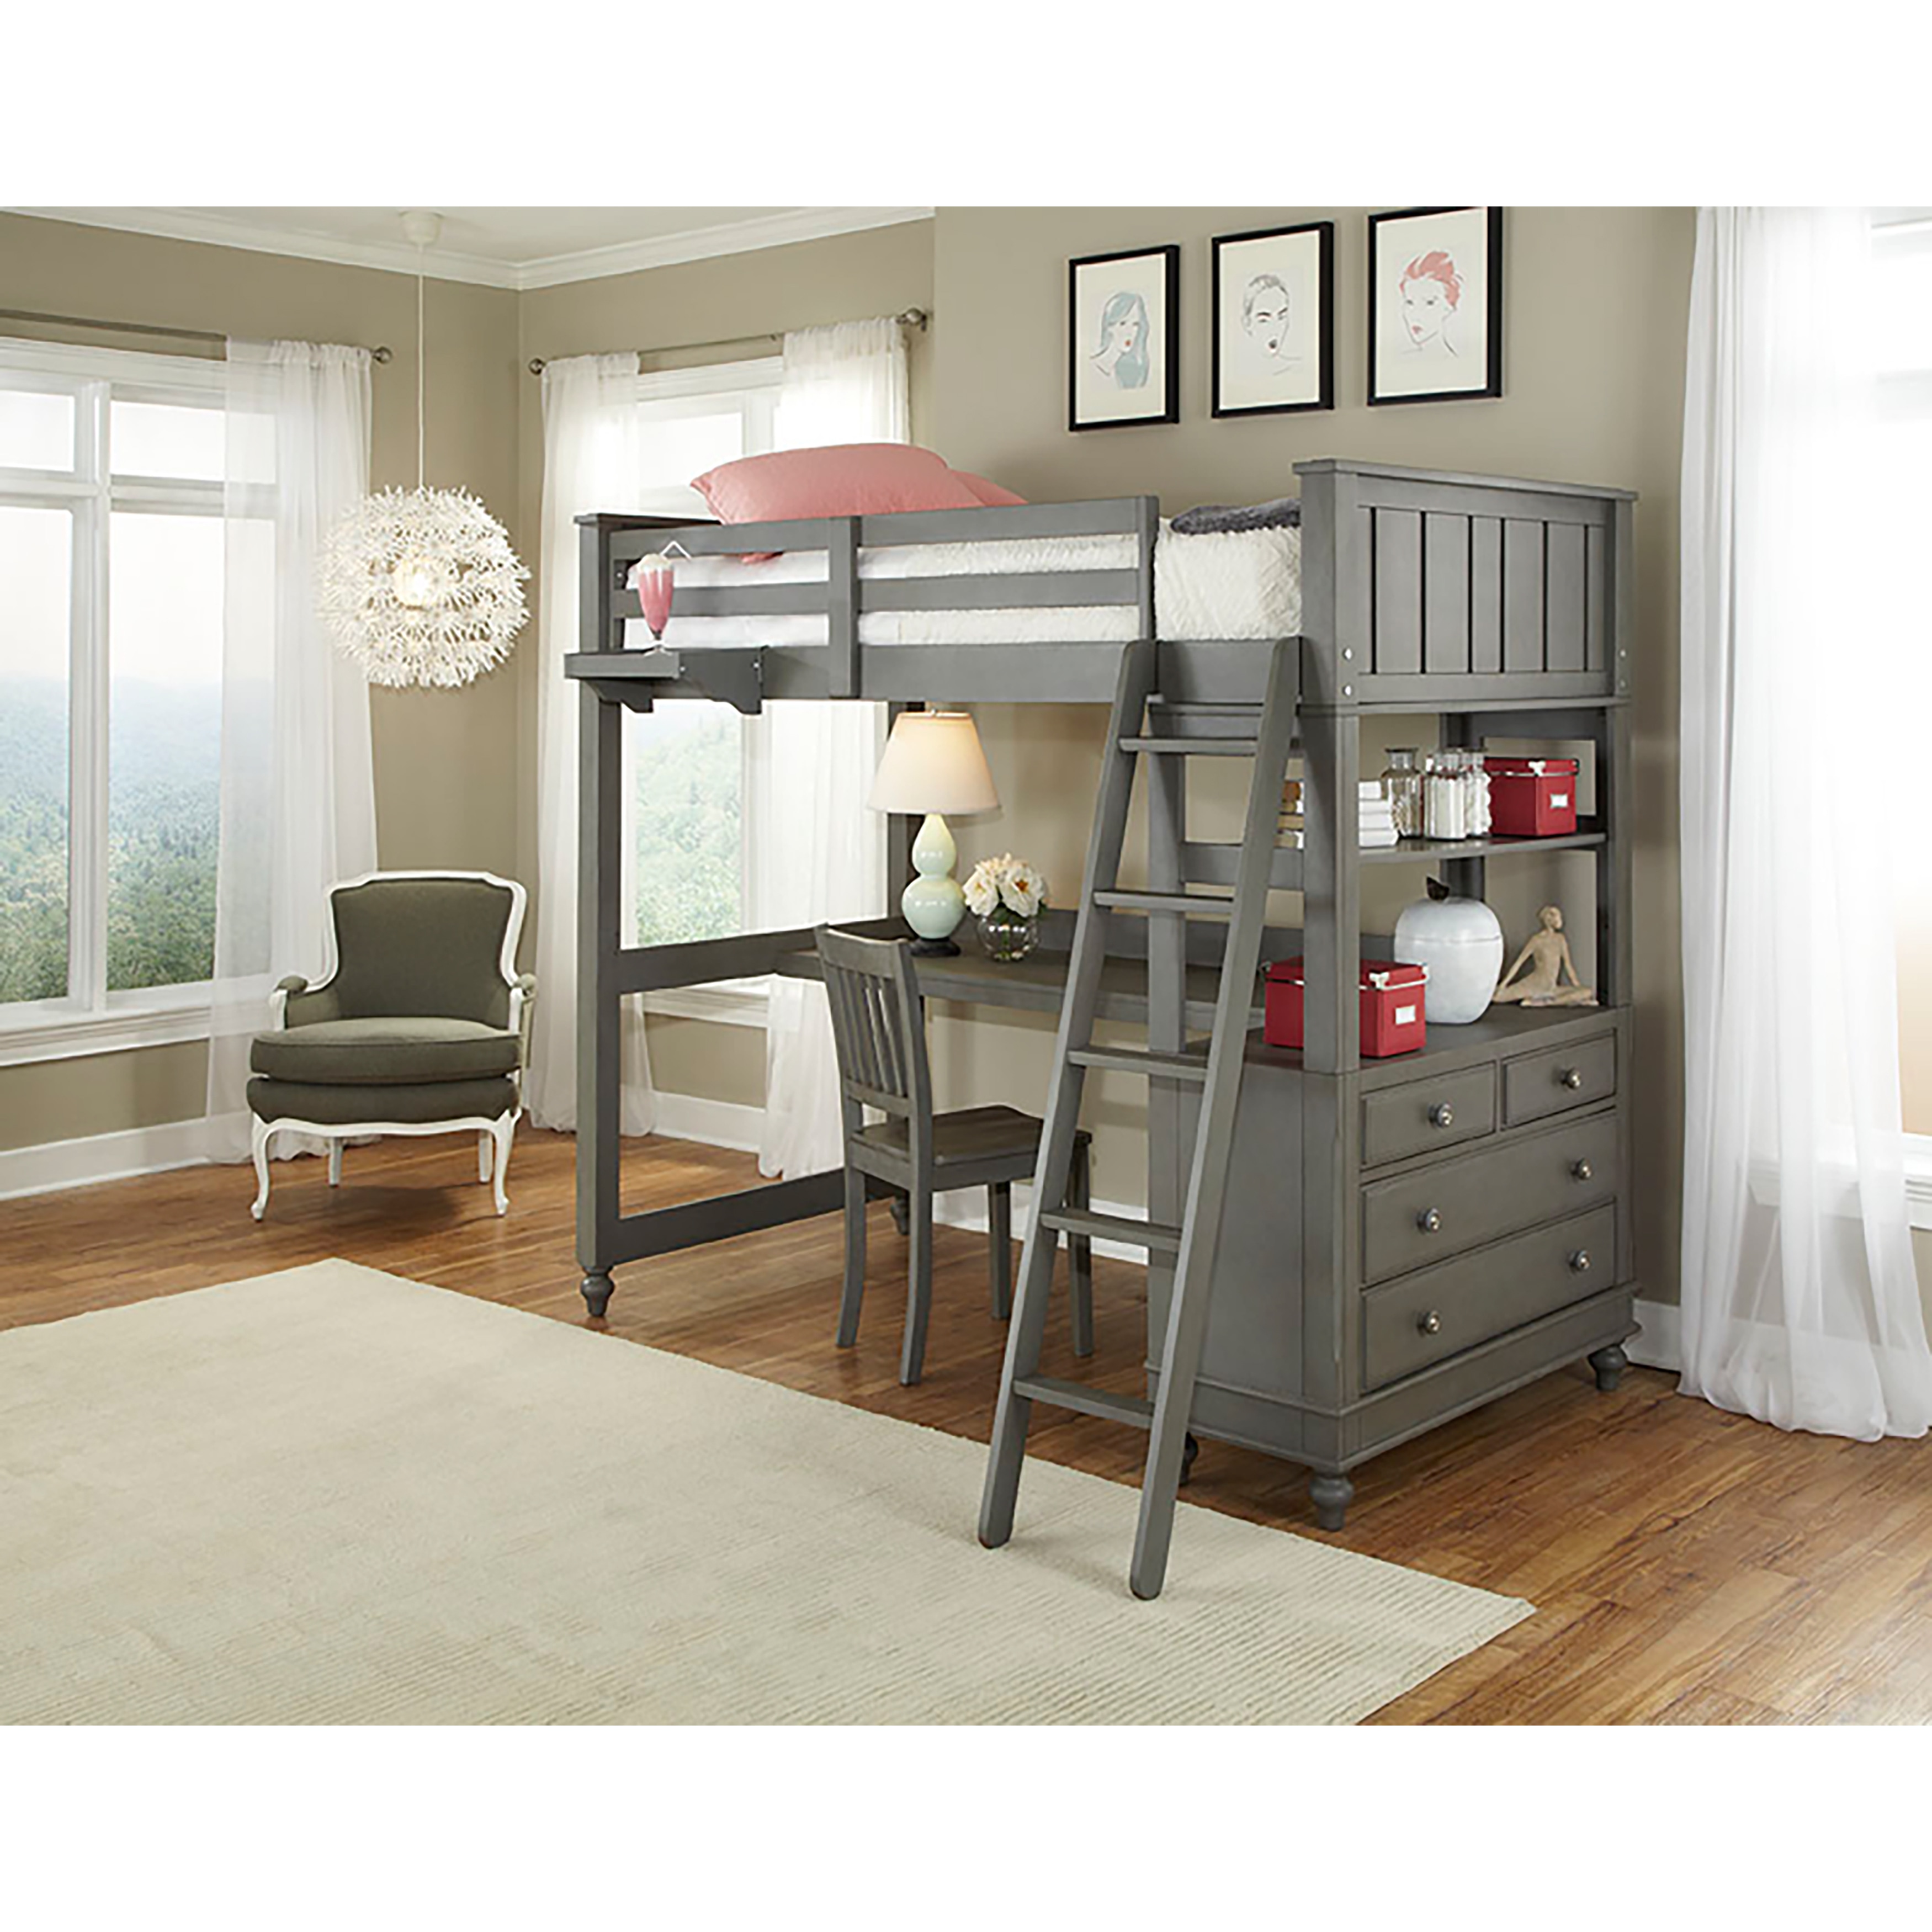 Hillsdale Kids and Teen Lake House Twin Loft with Stone Desk